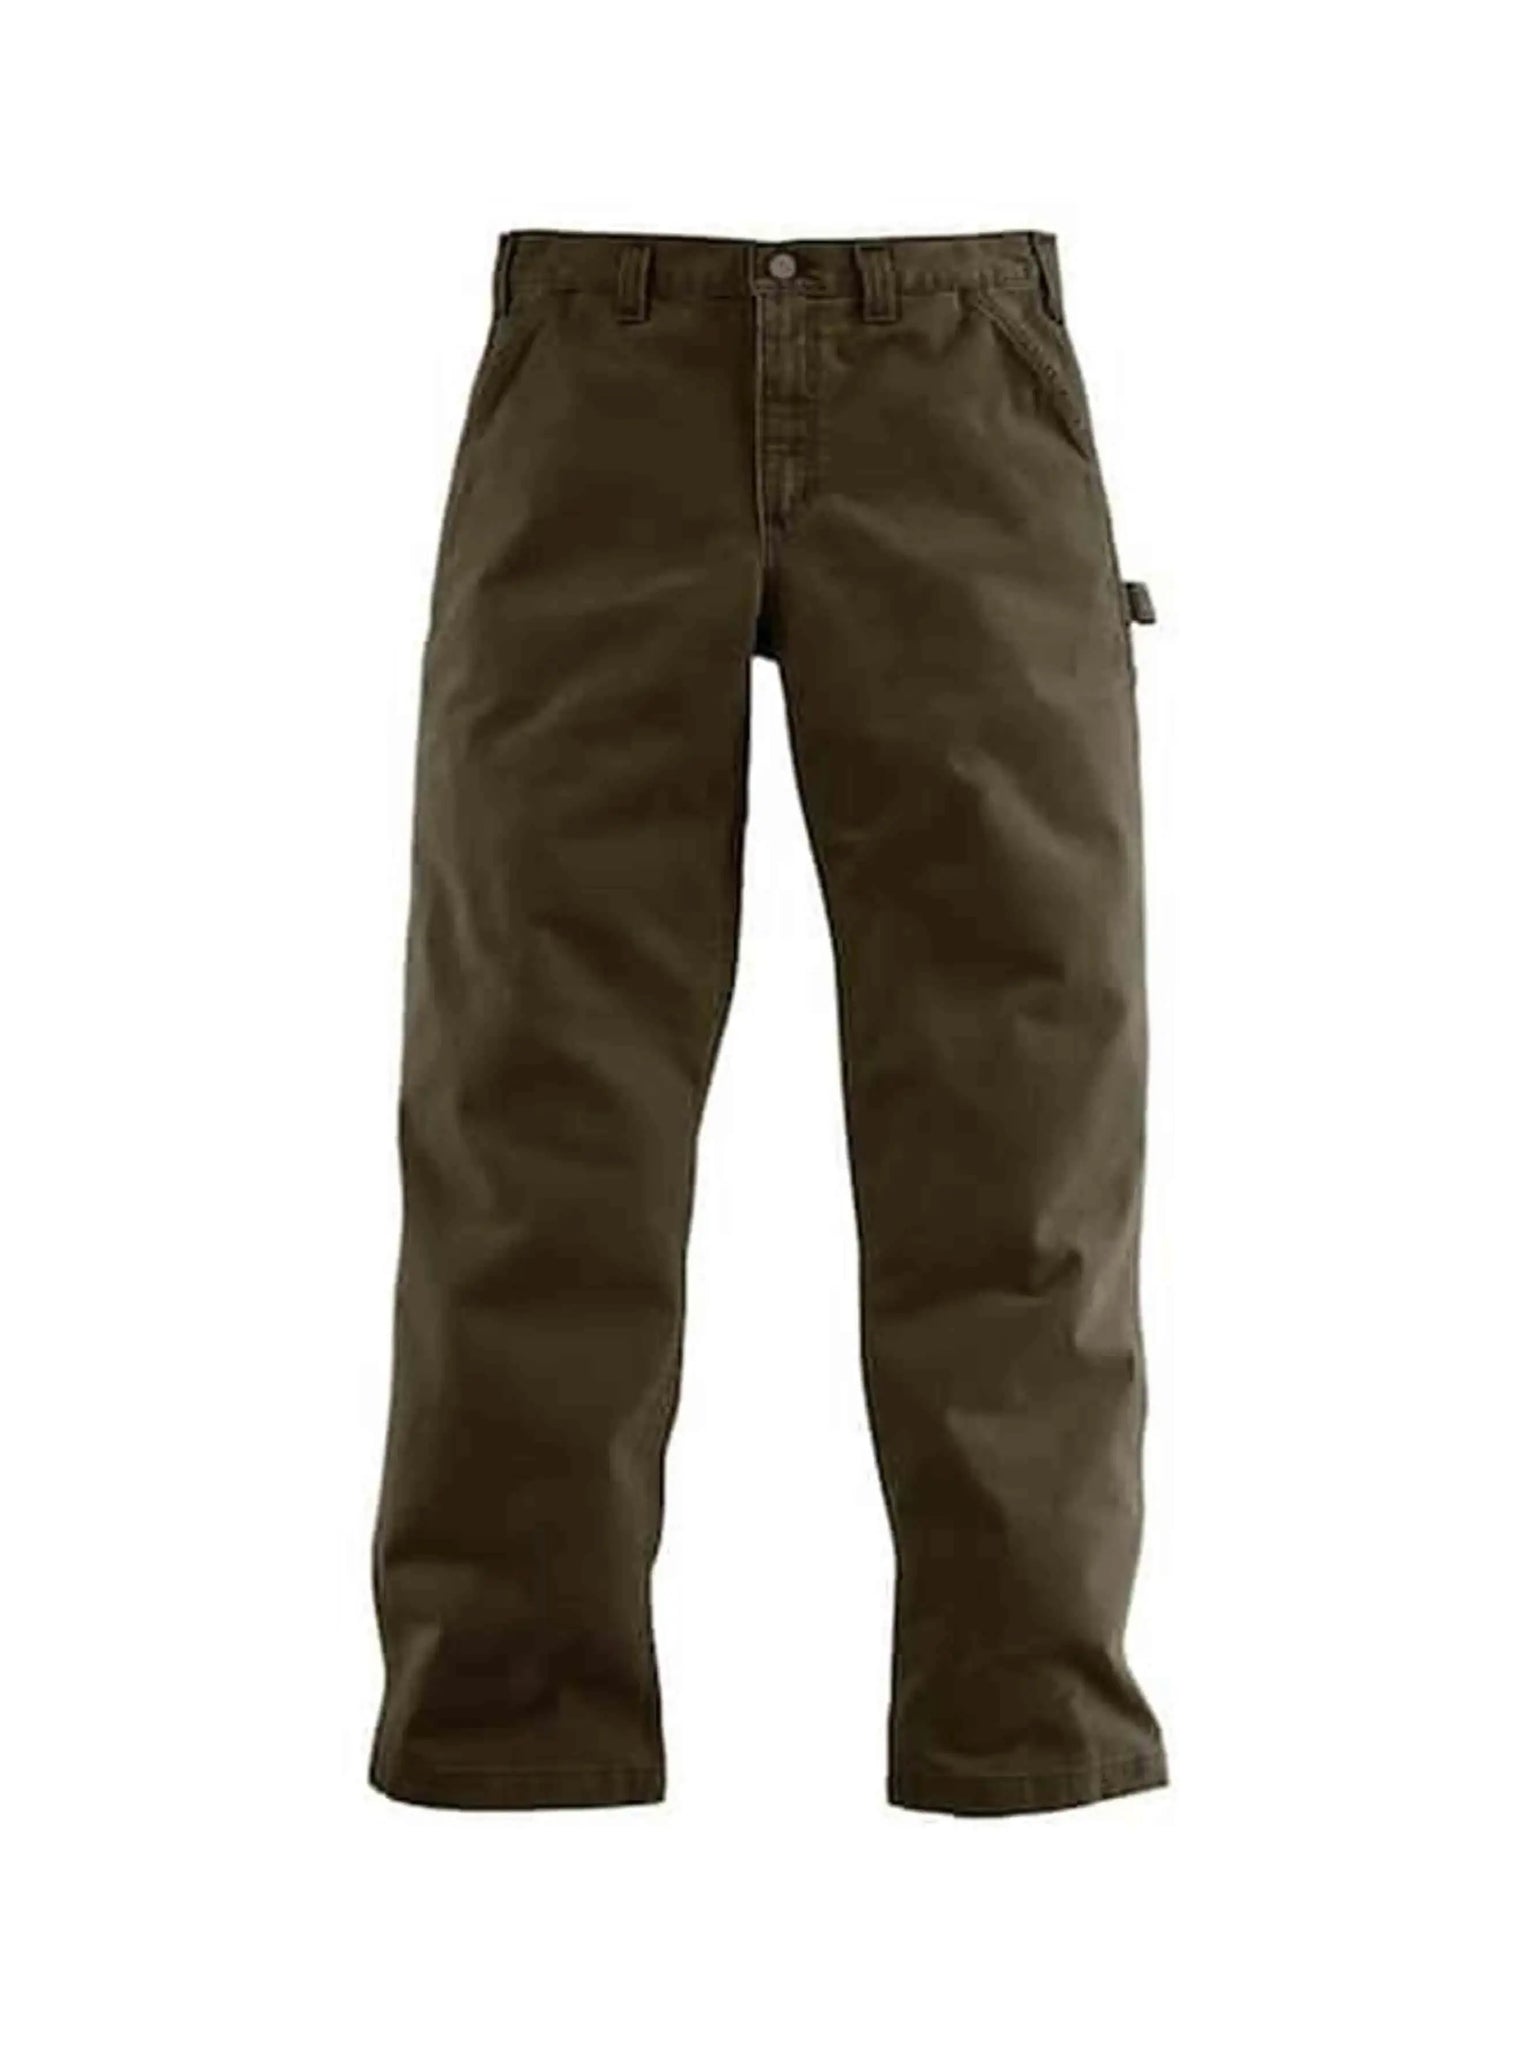 Carhartt Washed Twill Relaxed Fit Pant Dark Coffee - Prior